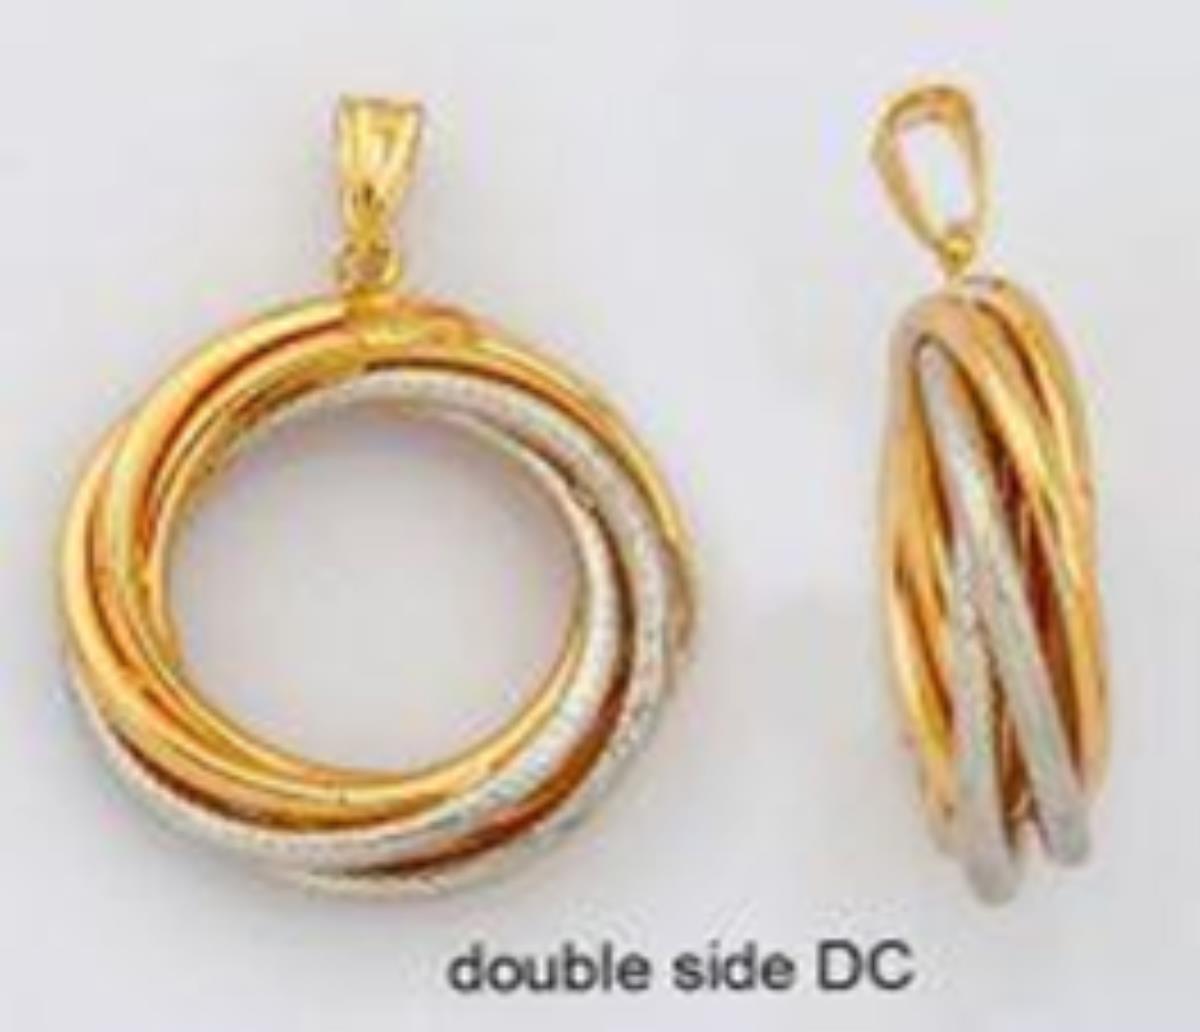 14K Two-Tone Gold Polished & Double Sided DC Twisted Wreath Pendant